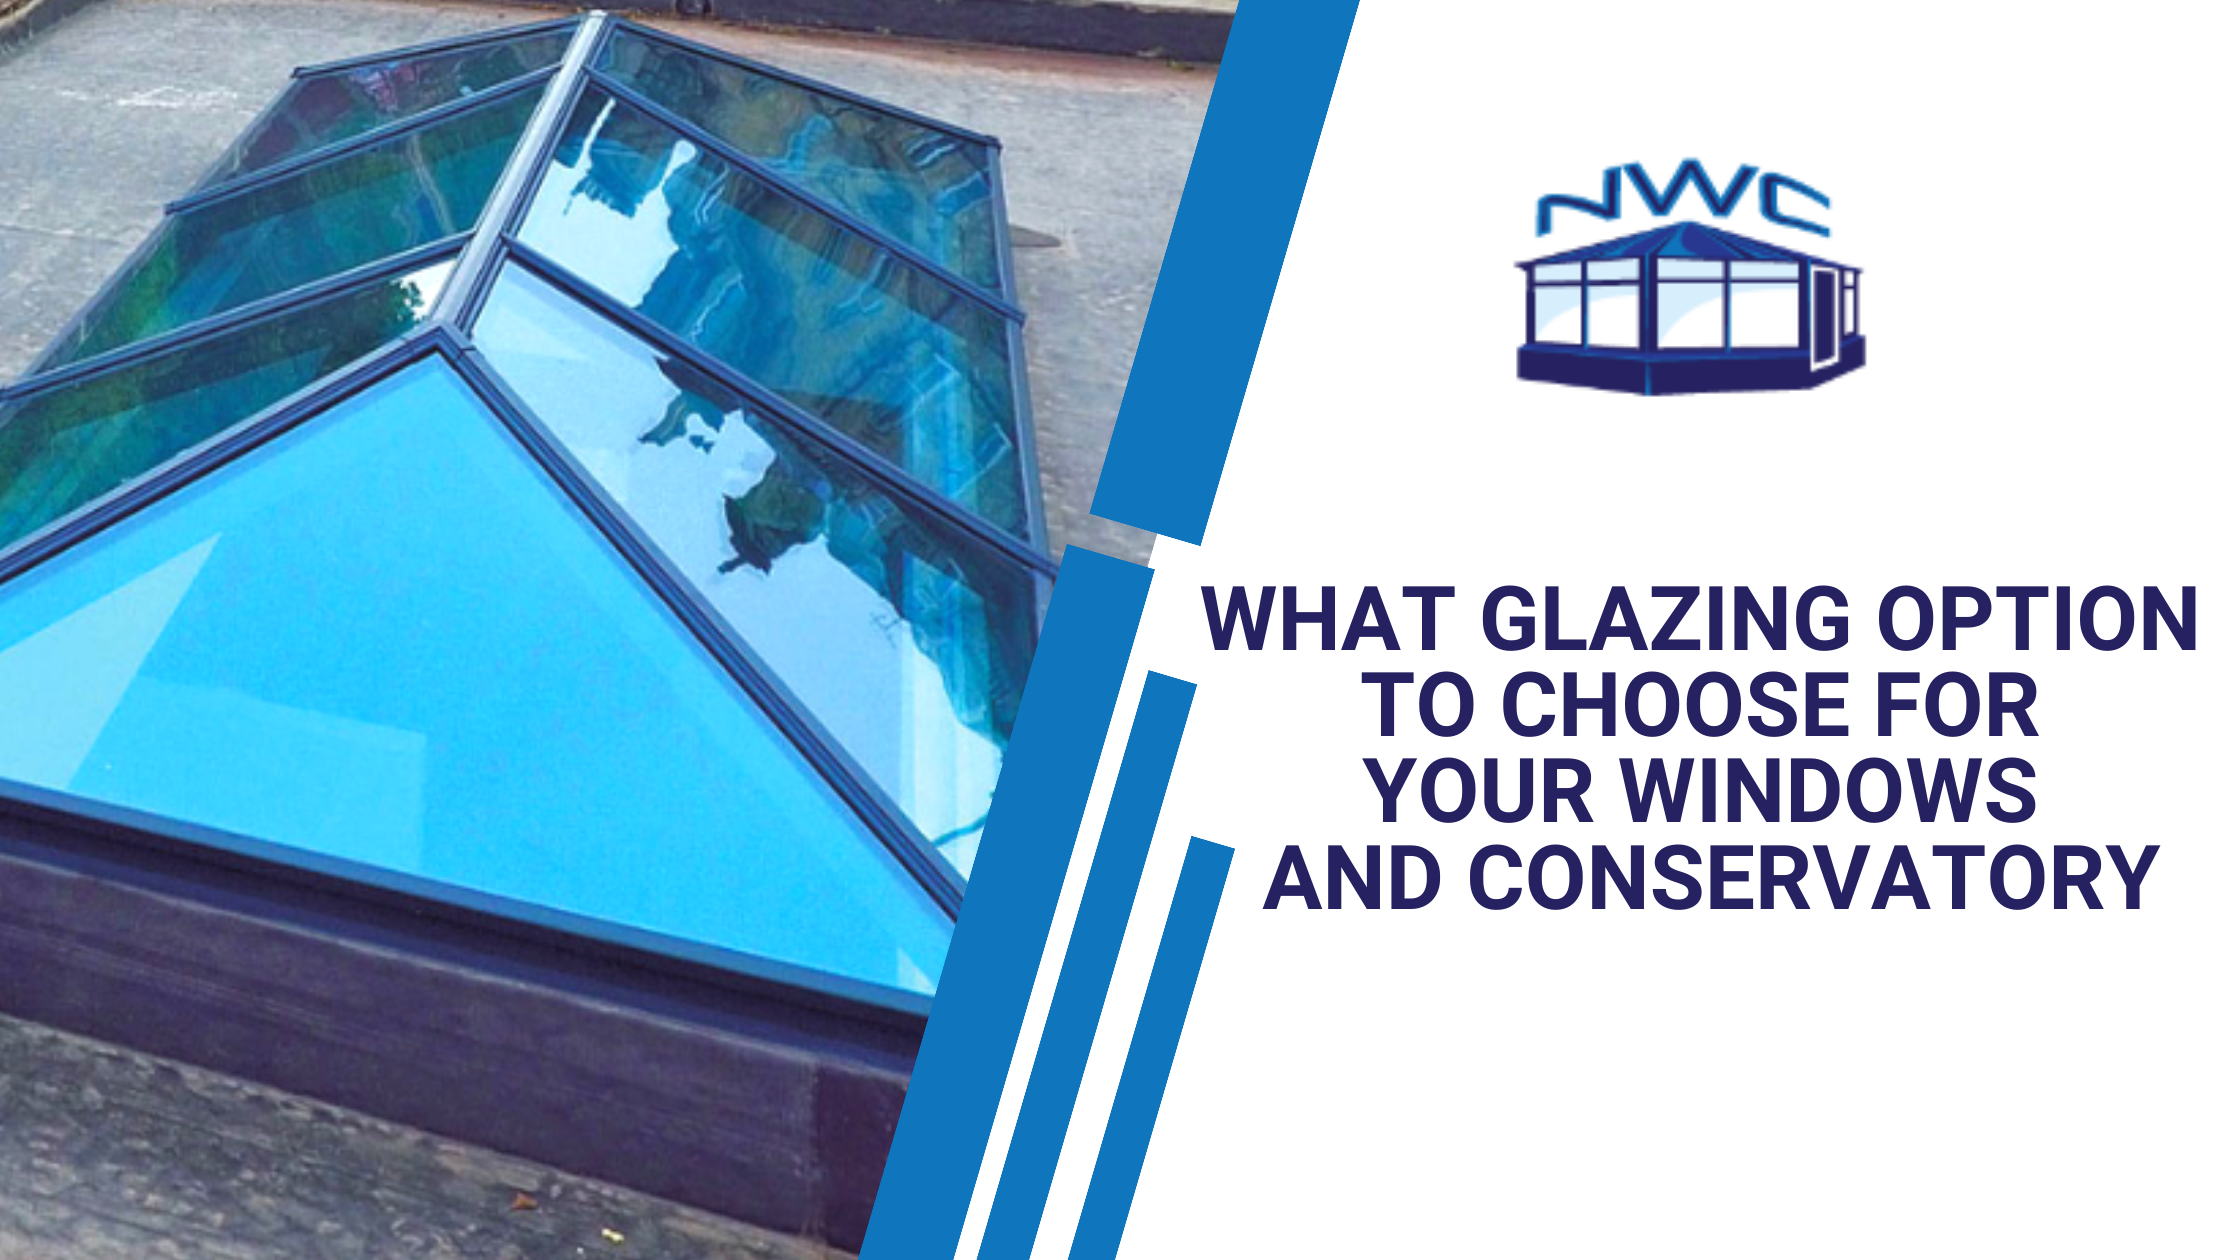 What glazing option to choose for your windows blog banner